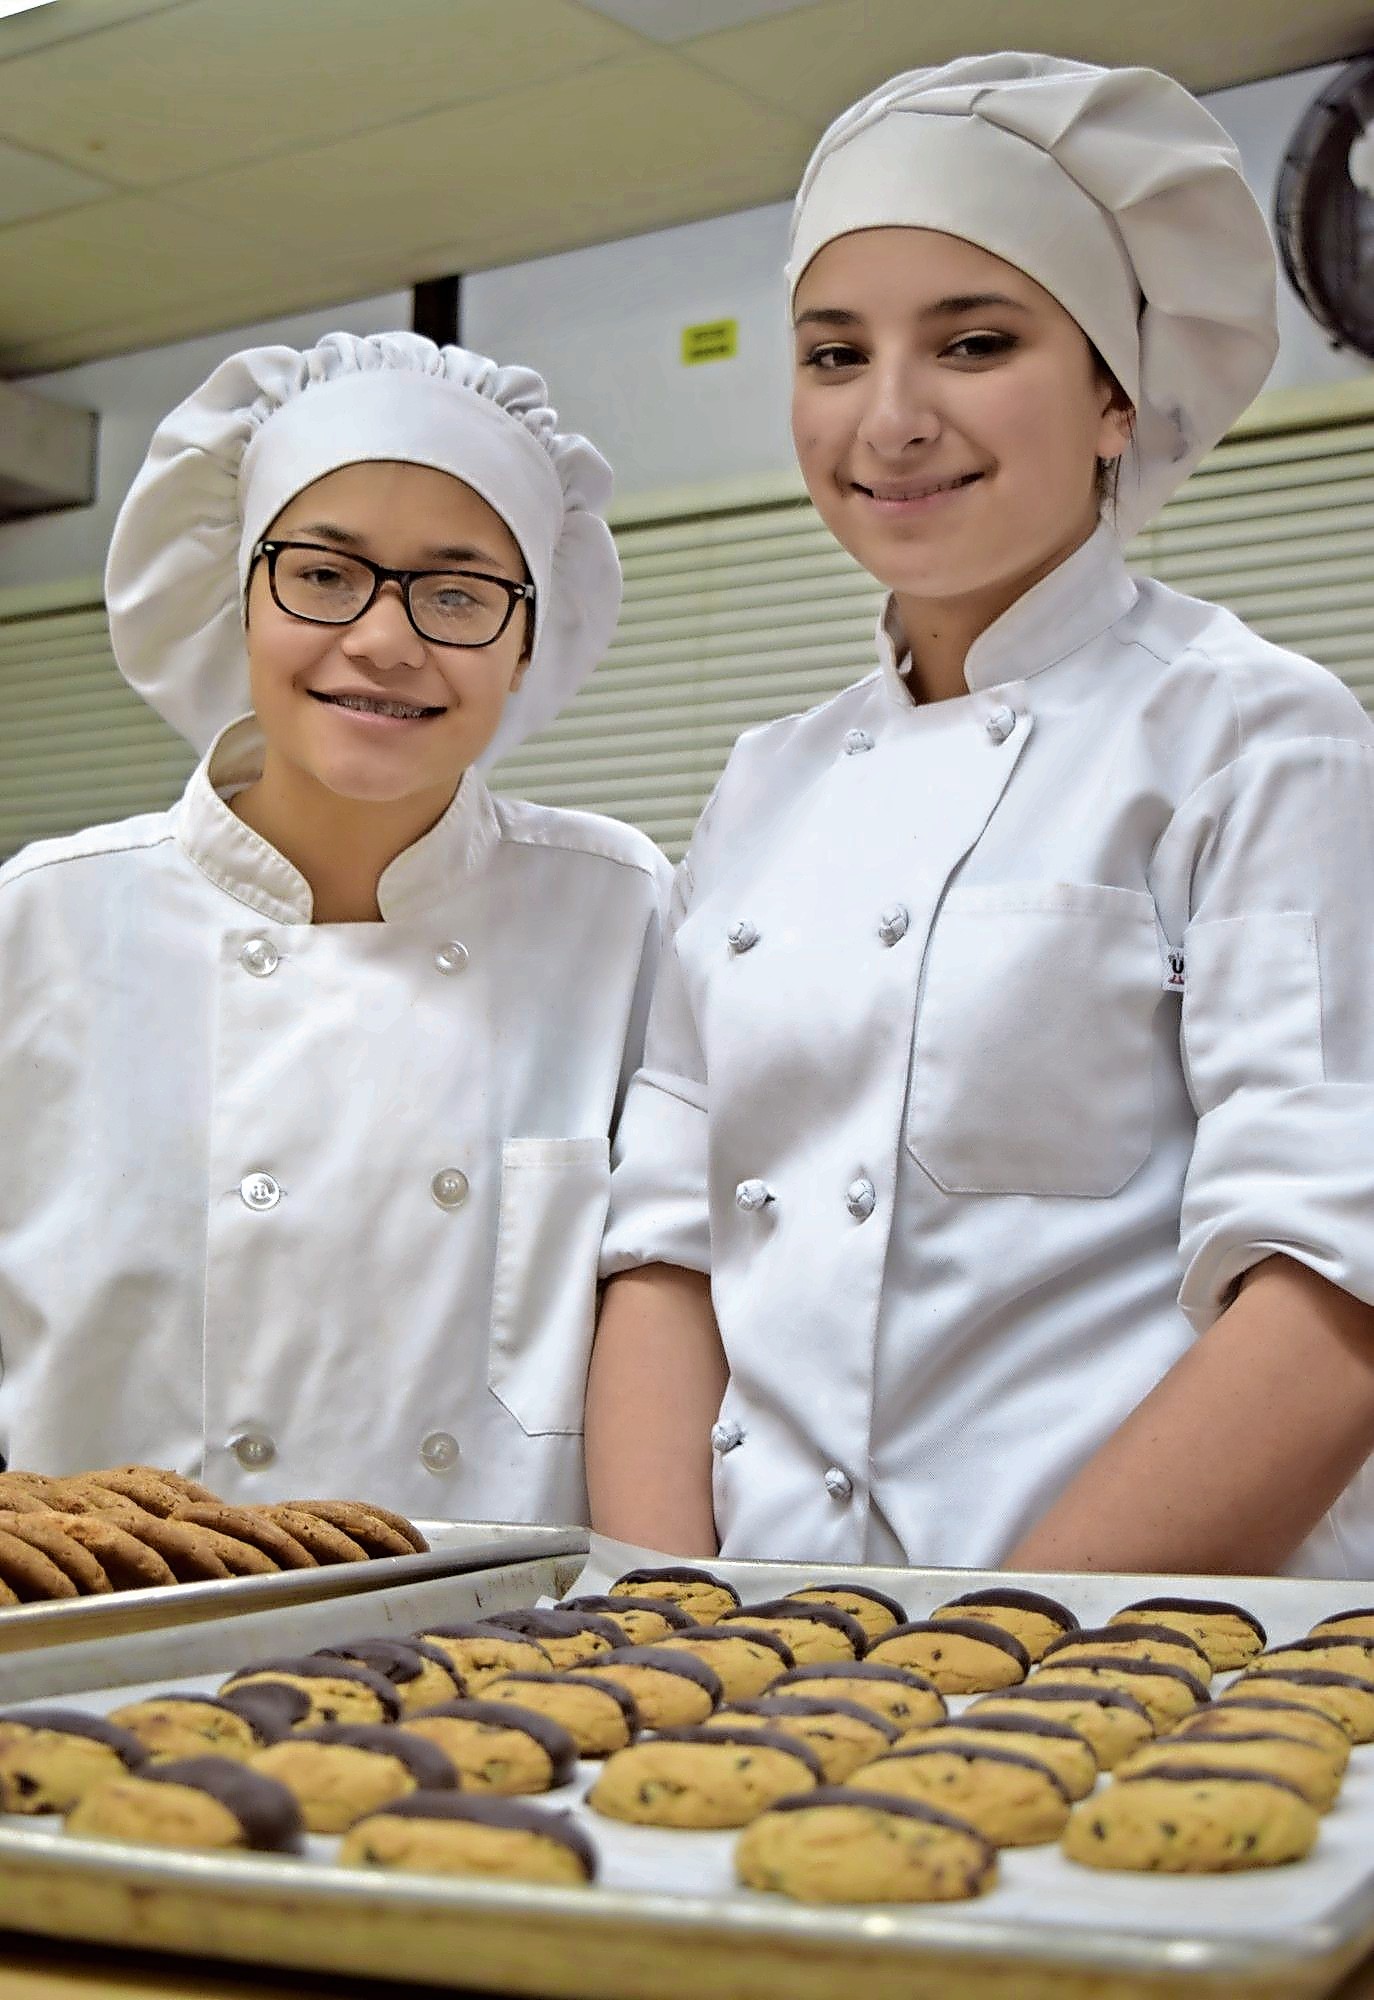 MacArthur High School students Zulema Duran, left, and Sarina Aviles showed off their culinary skills at a GC Tech open house last January.